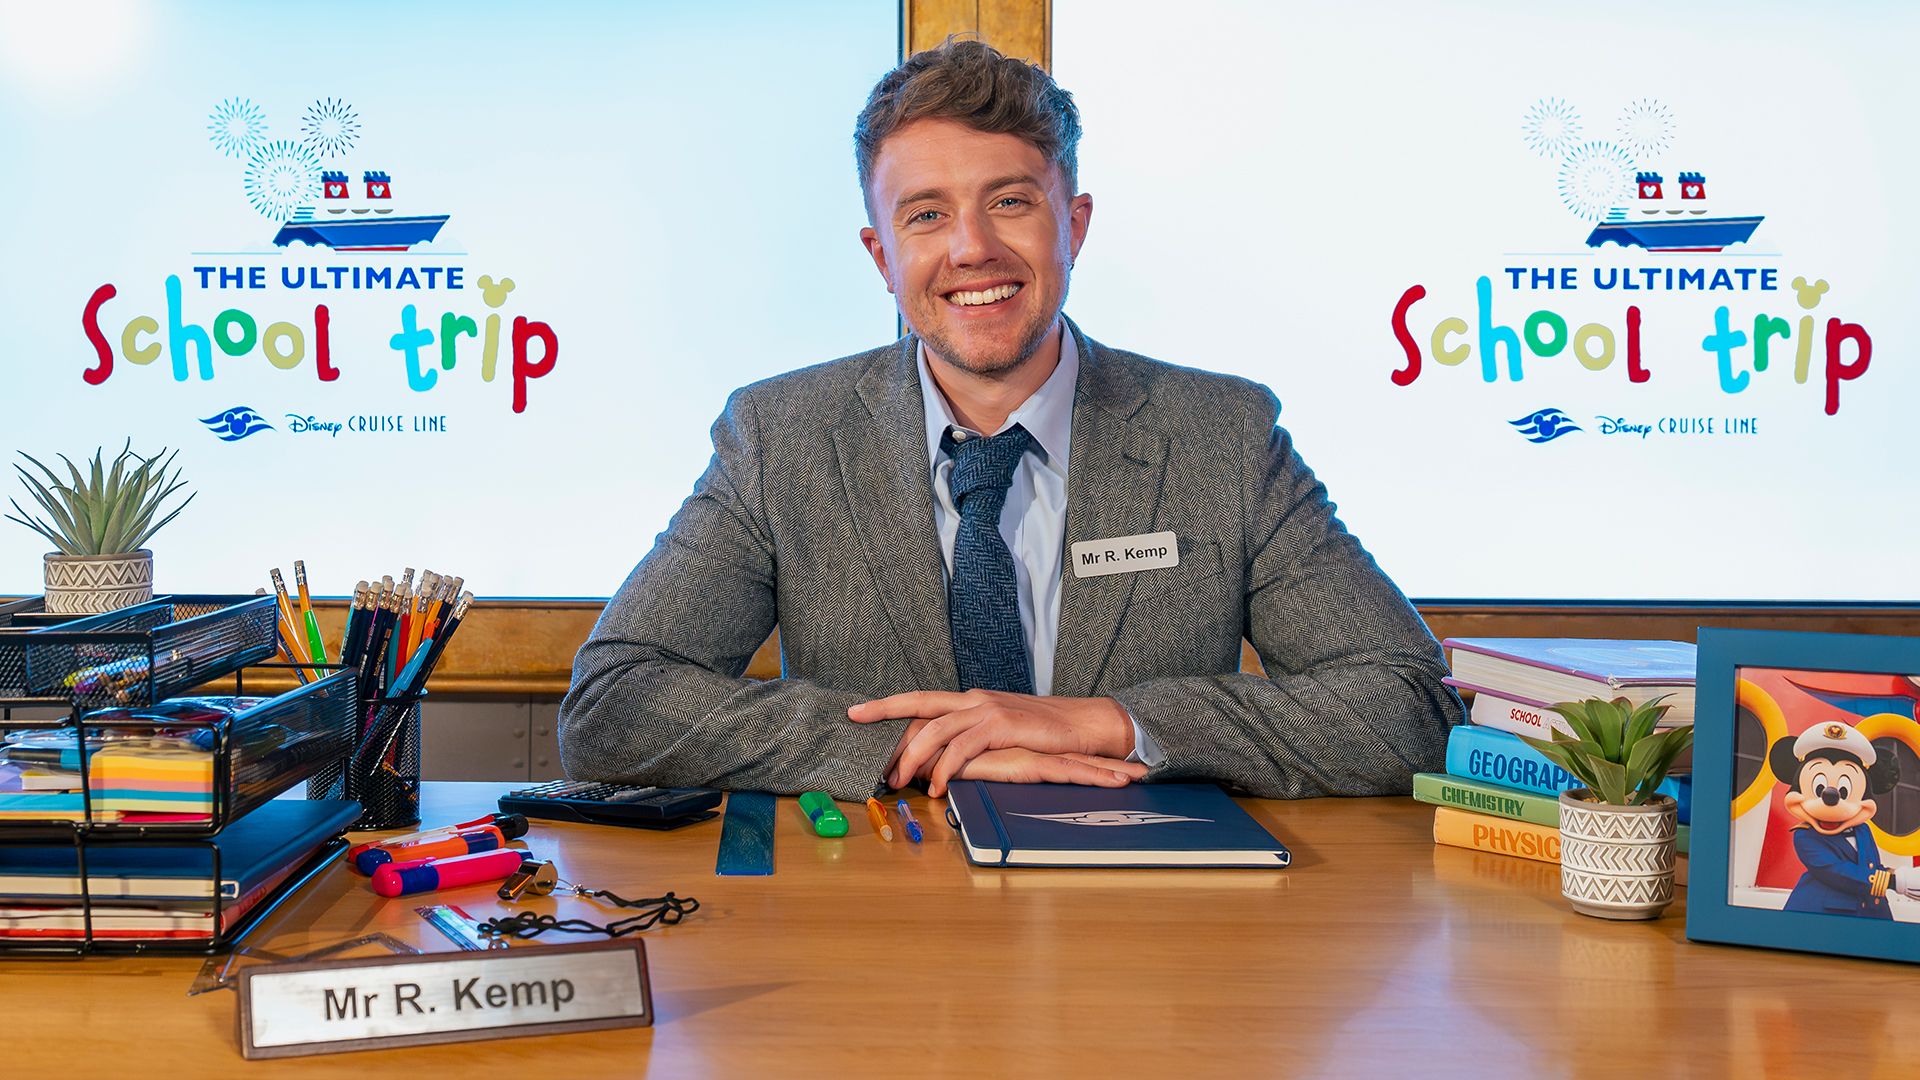 Roman Kemp dressed up as a supply teacher for the Ultimate School Trip with Disney Cruise Line competition